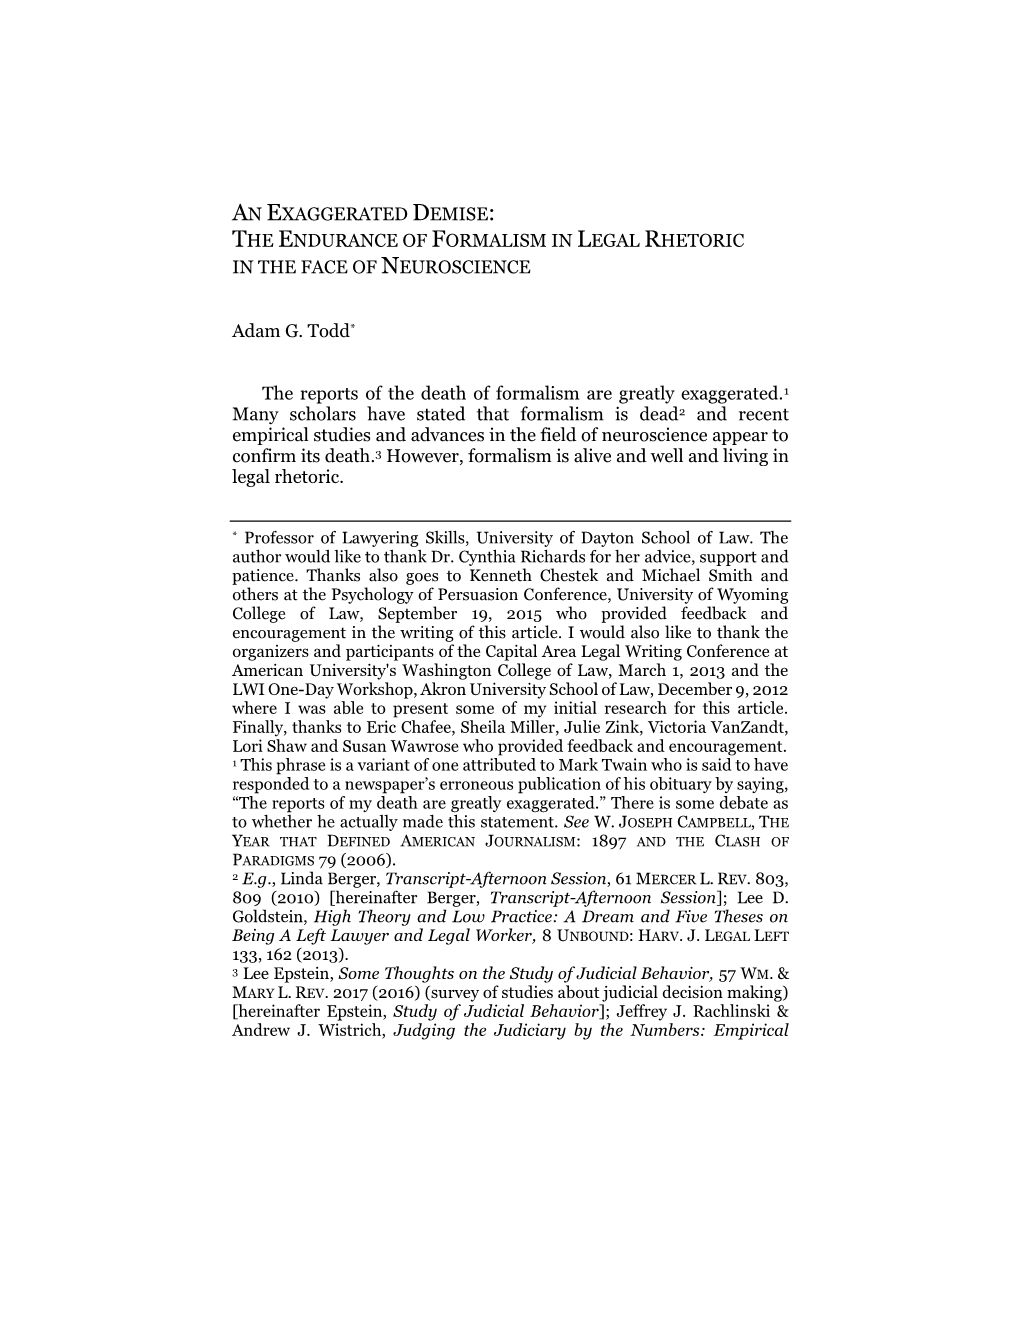 AN EXAGGERATED DEMISE: the ENDURANCE of FORMALISM in LEGAL RHETORIC in the FACE of NEUROSCIENCE Adam G. Todd* the Reports Of